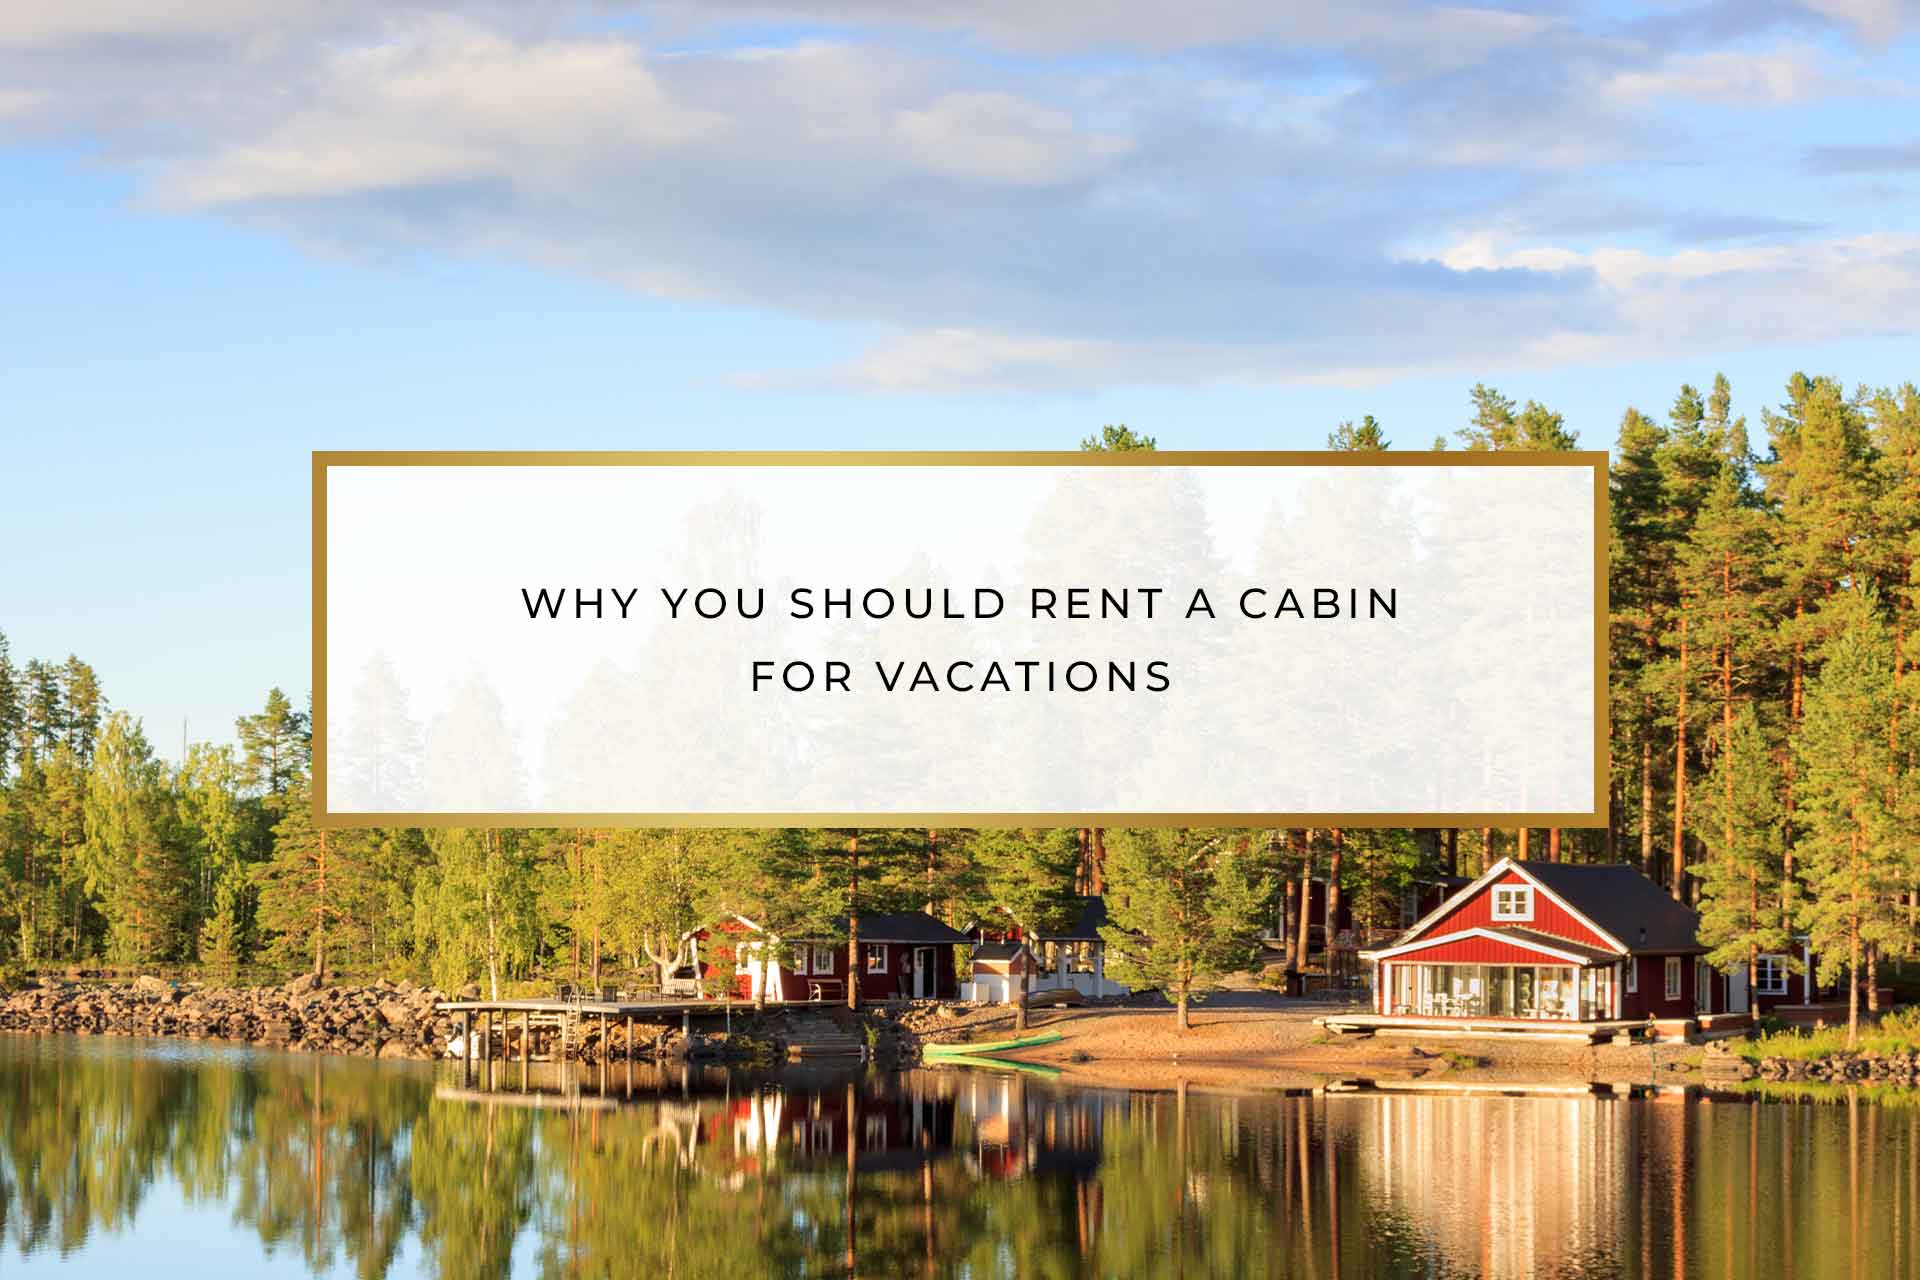 Why You Should Rent a Cabin for Vacations | Highland Pines Resort & Marina